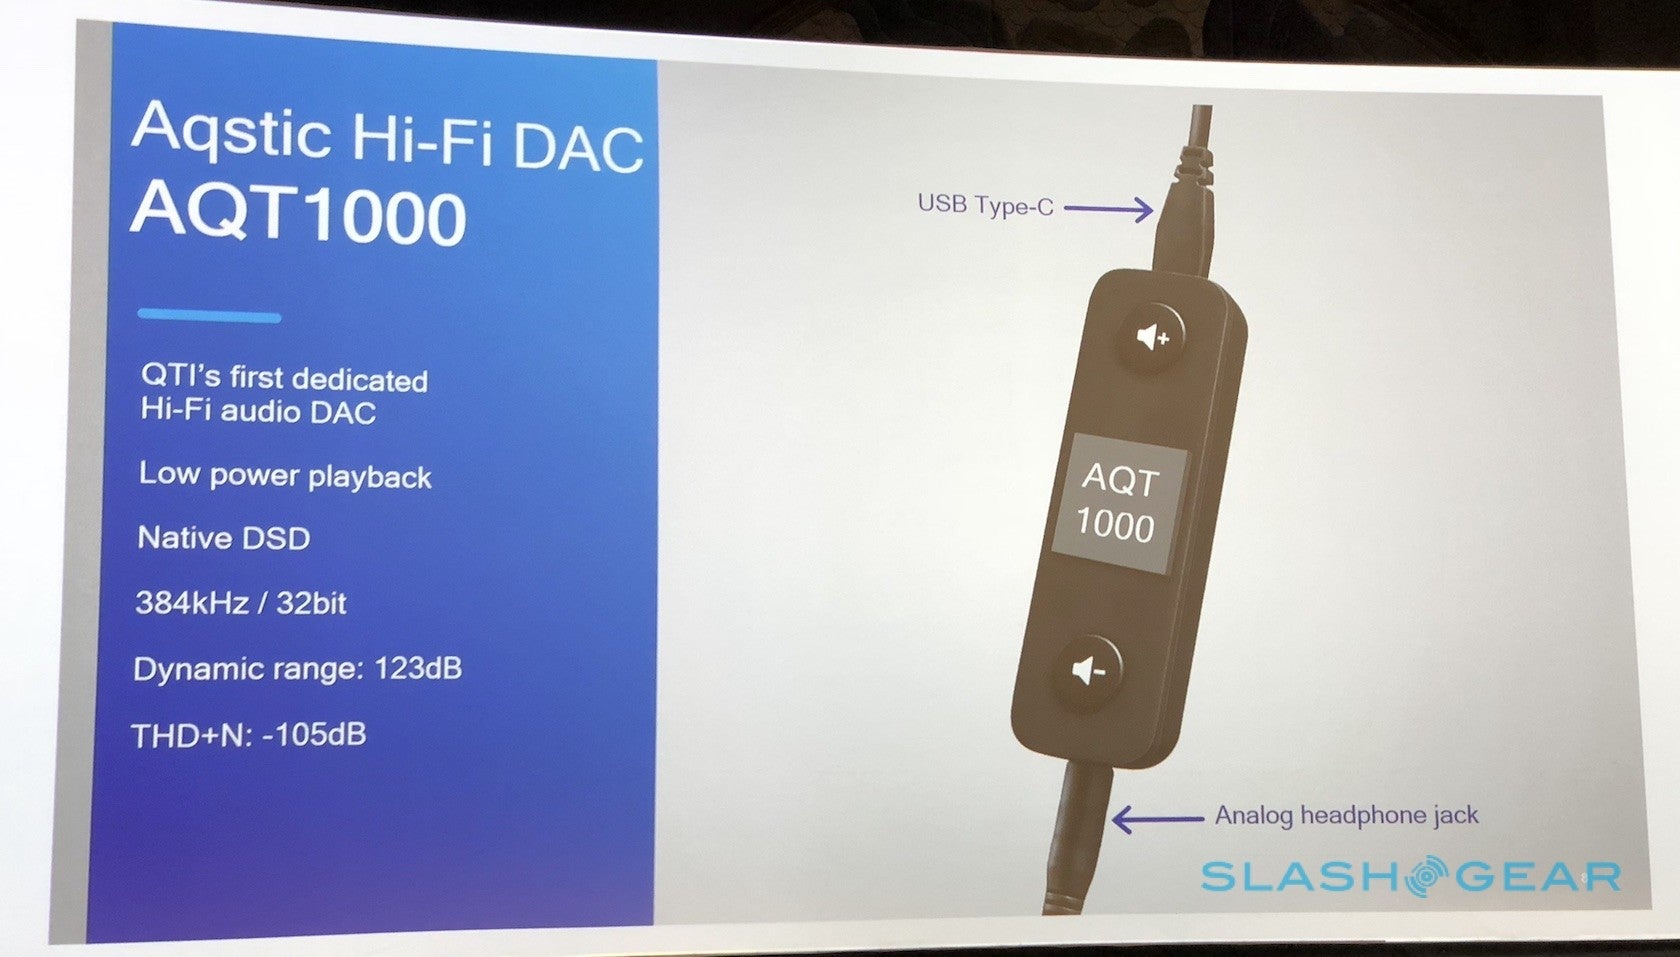 Qualcomm wants to redefine Hi-Fi for smartphones with its new USB Type-C DAC